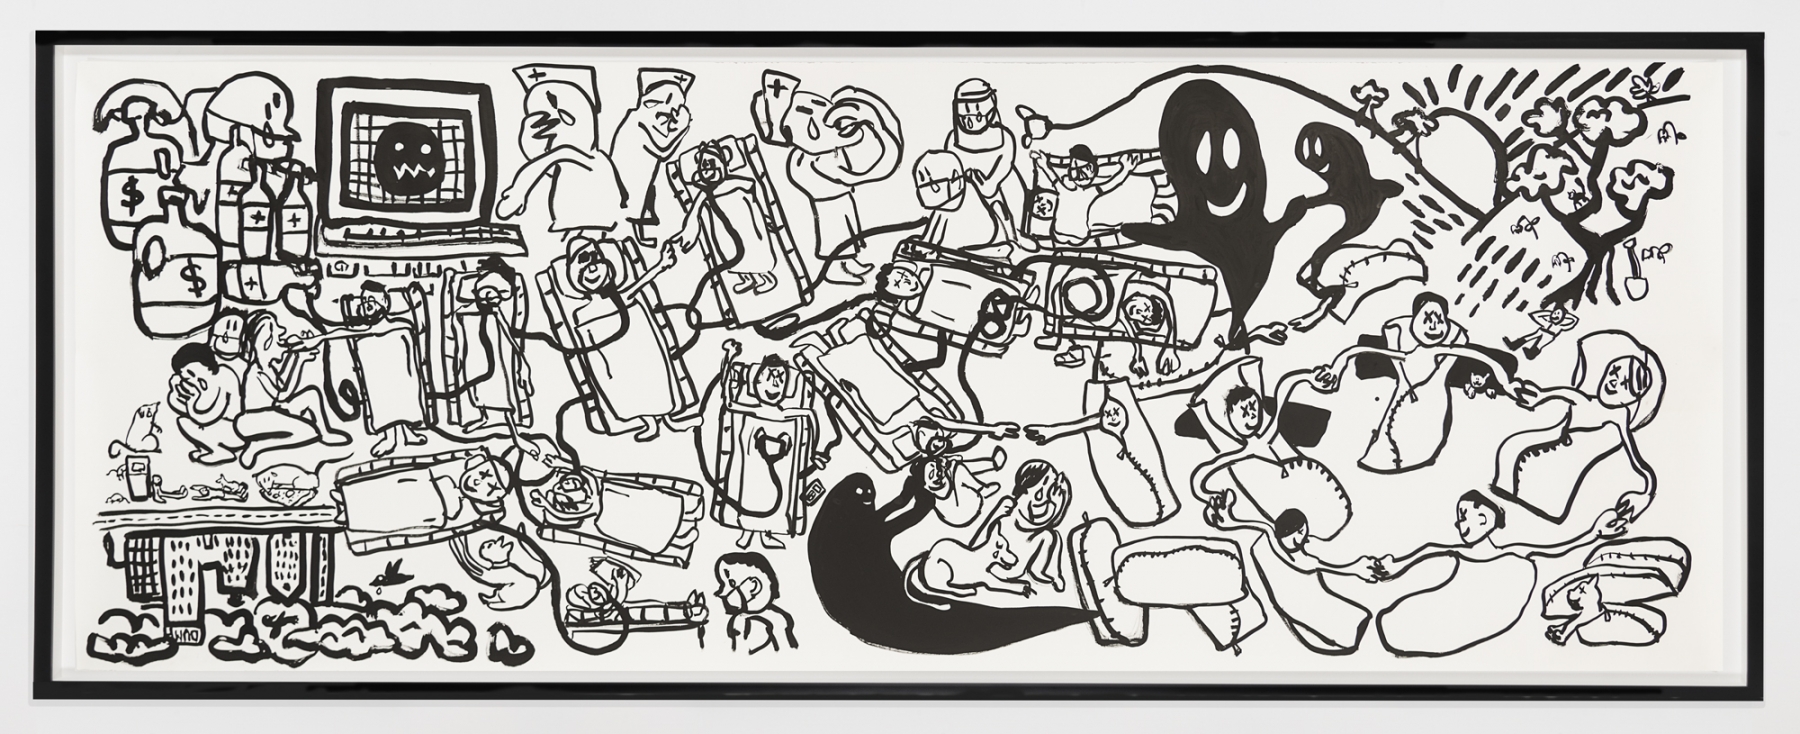 Paul Chan
die Seuche (epidemic), 2020
Ink on paper
Paper: 50 1/2 x 136 inches (128.3 x 345.4 cm)
Frame: 54 1/2 x 140 x 2 7/8 inches (138.4 x 355.6 x 7.3 cm)